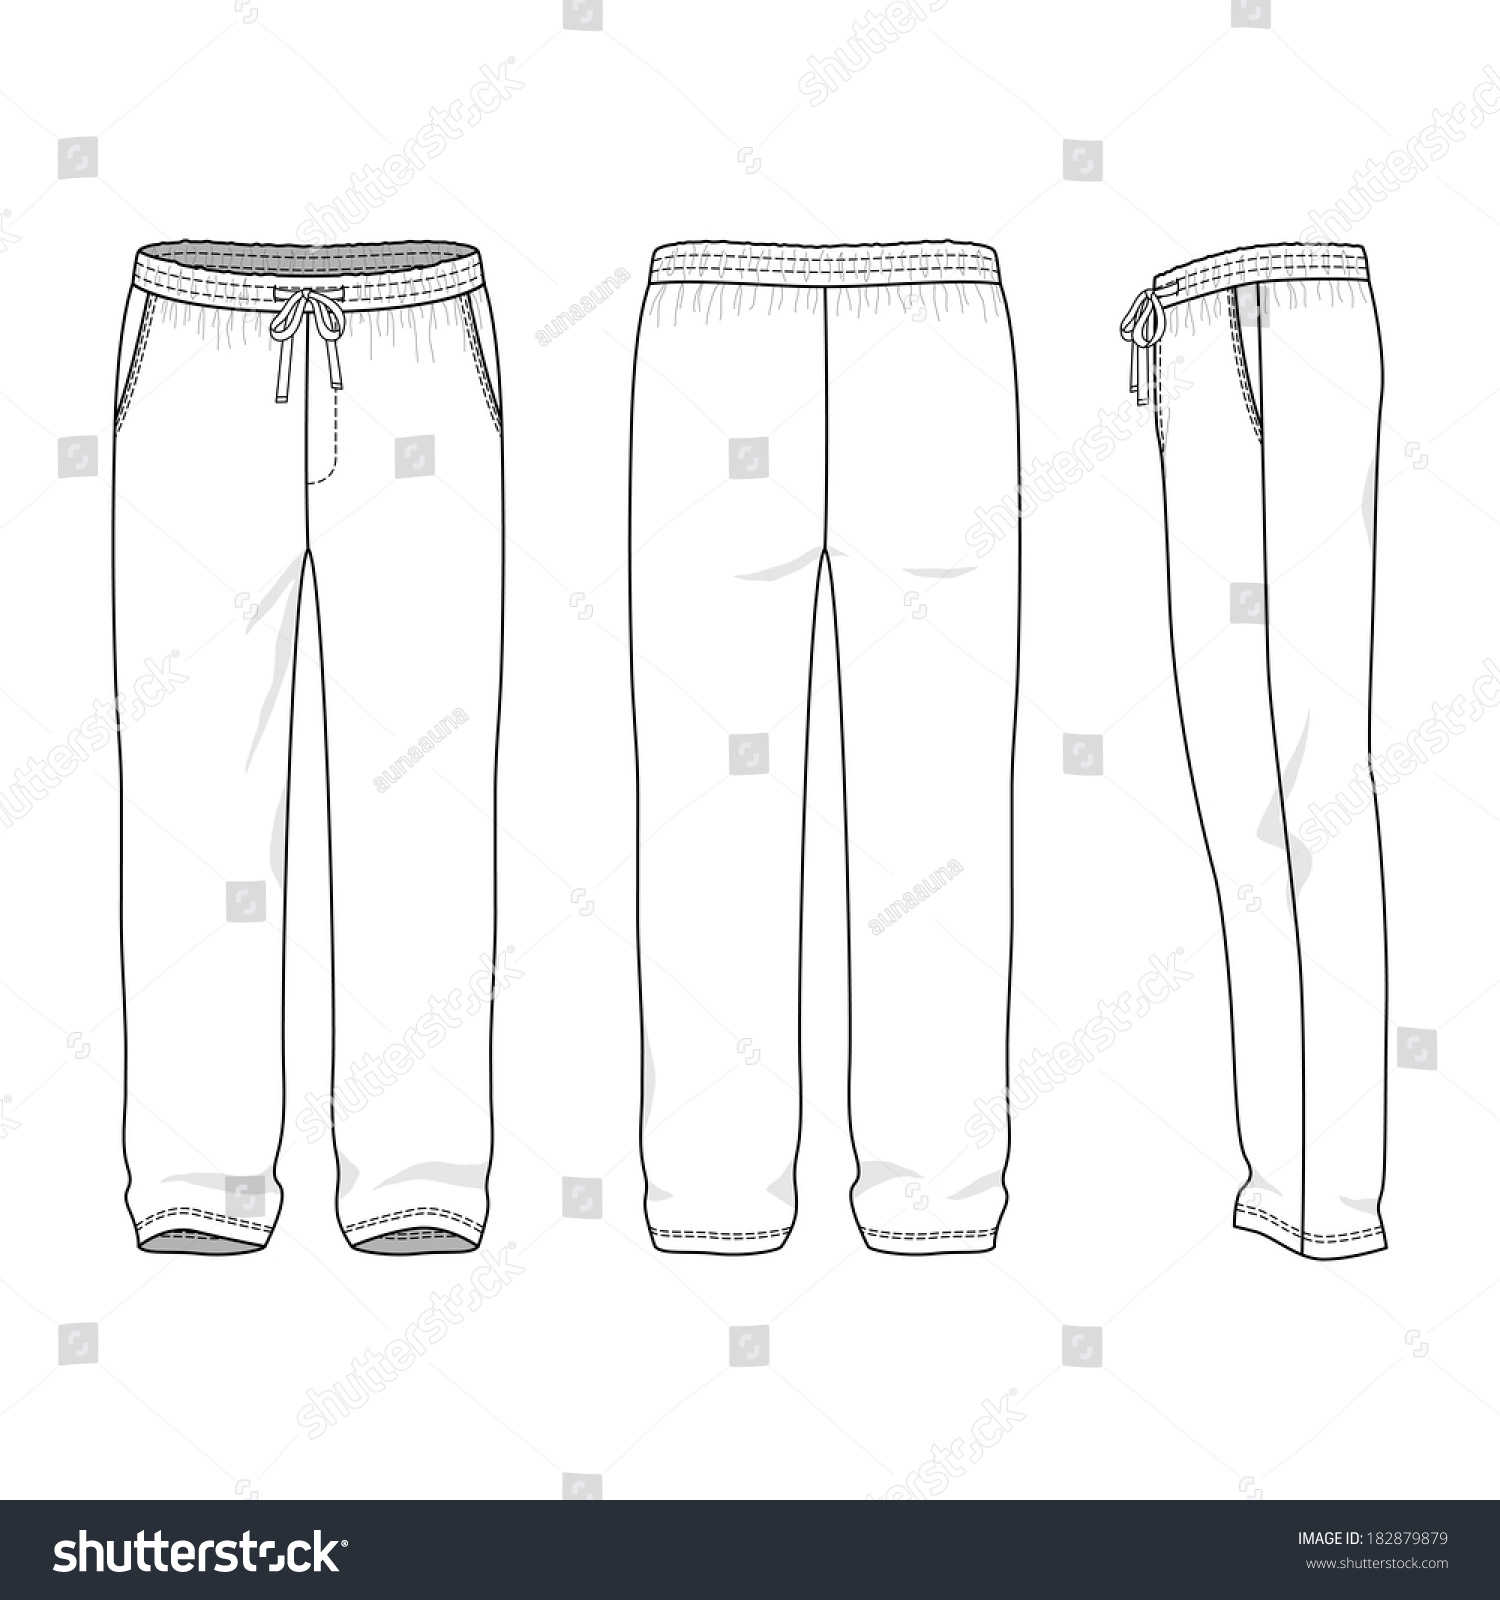 Blank Men'S Sweatpants In Front, Back And Side Views. Vector ...